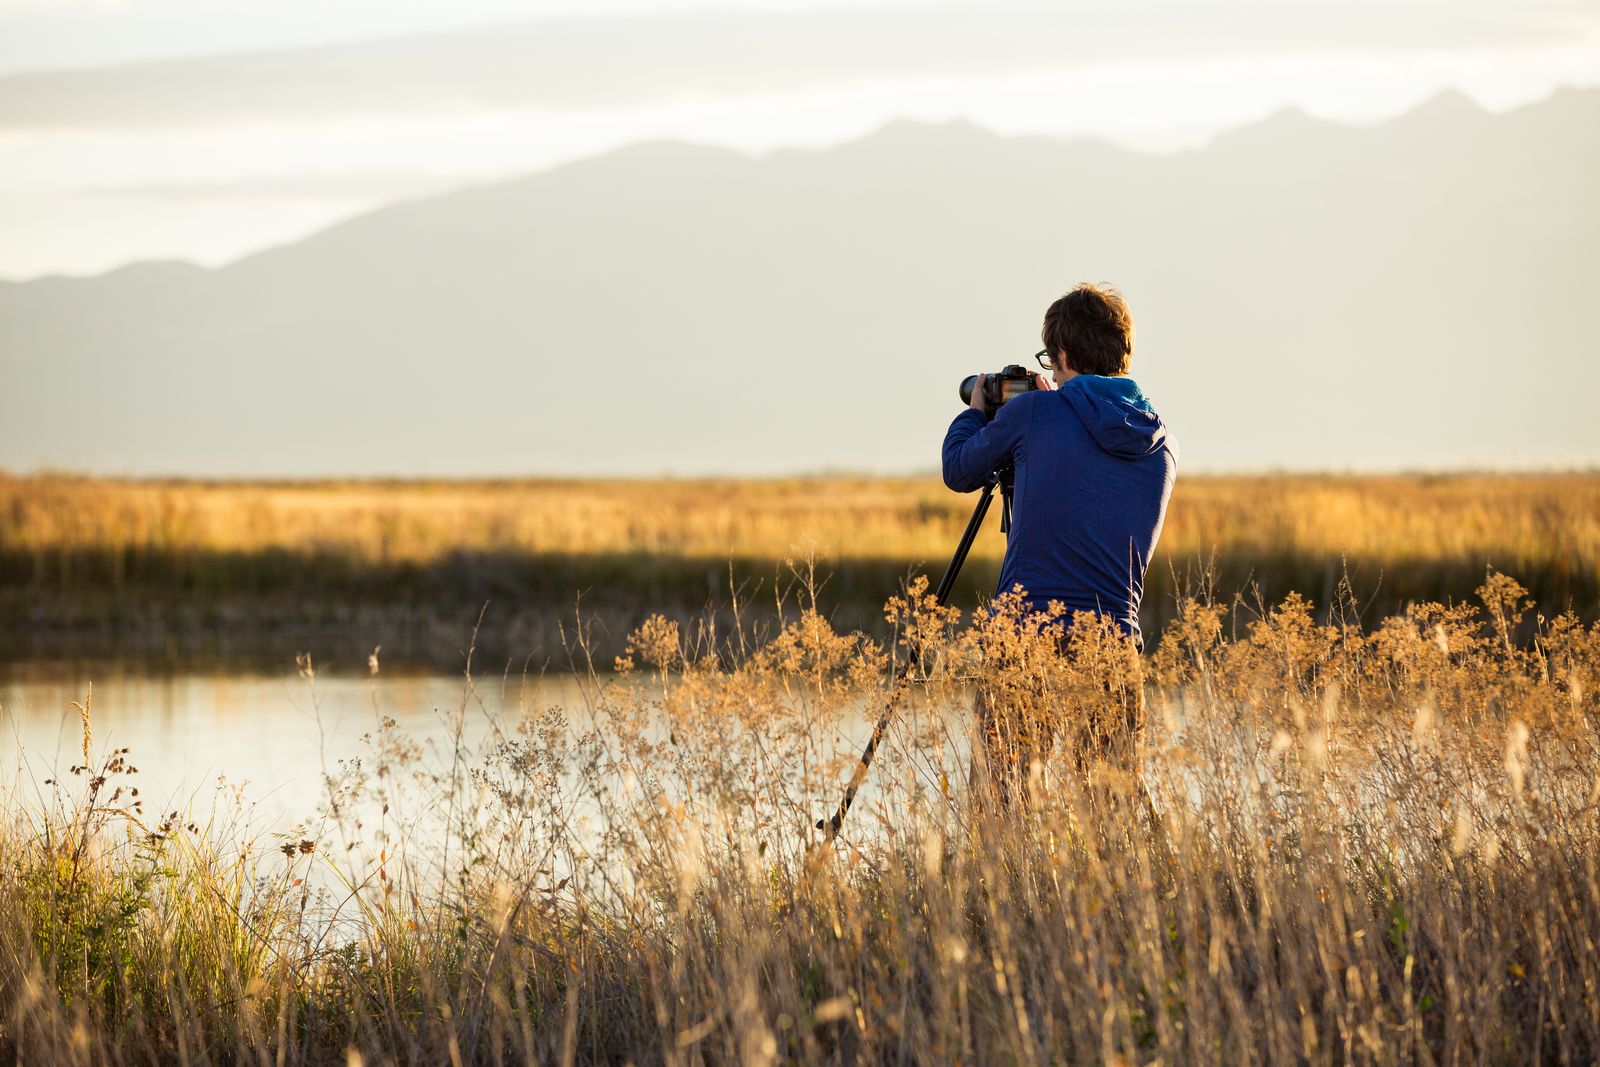 APPROVED Alamosa a photographers delight Visit USA Parks